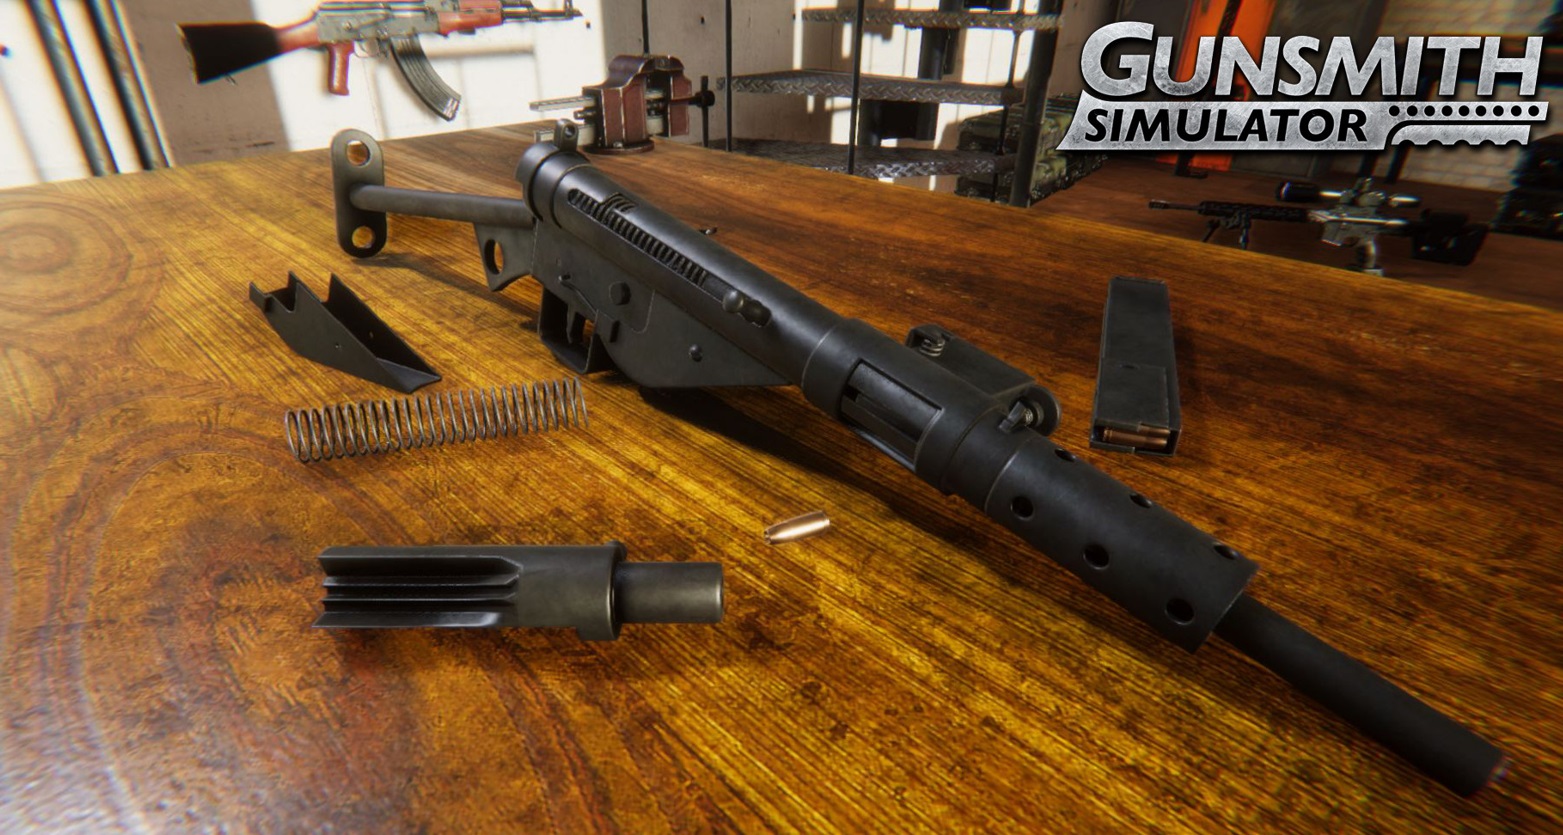 Gunsmith Simulator Gives Players A Chance To Try The Art Of Crafting Deadly Weapons GAMERS DECIDE